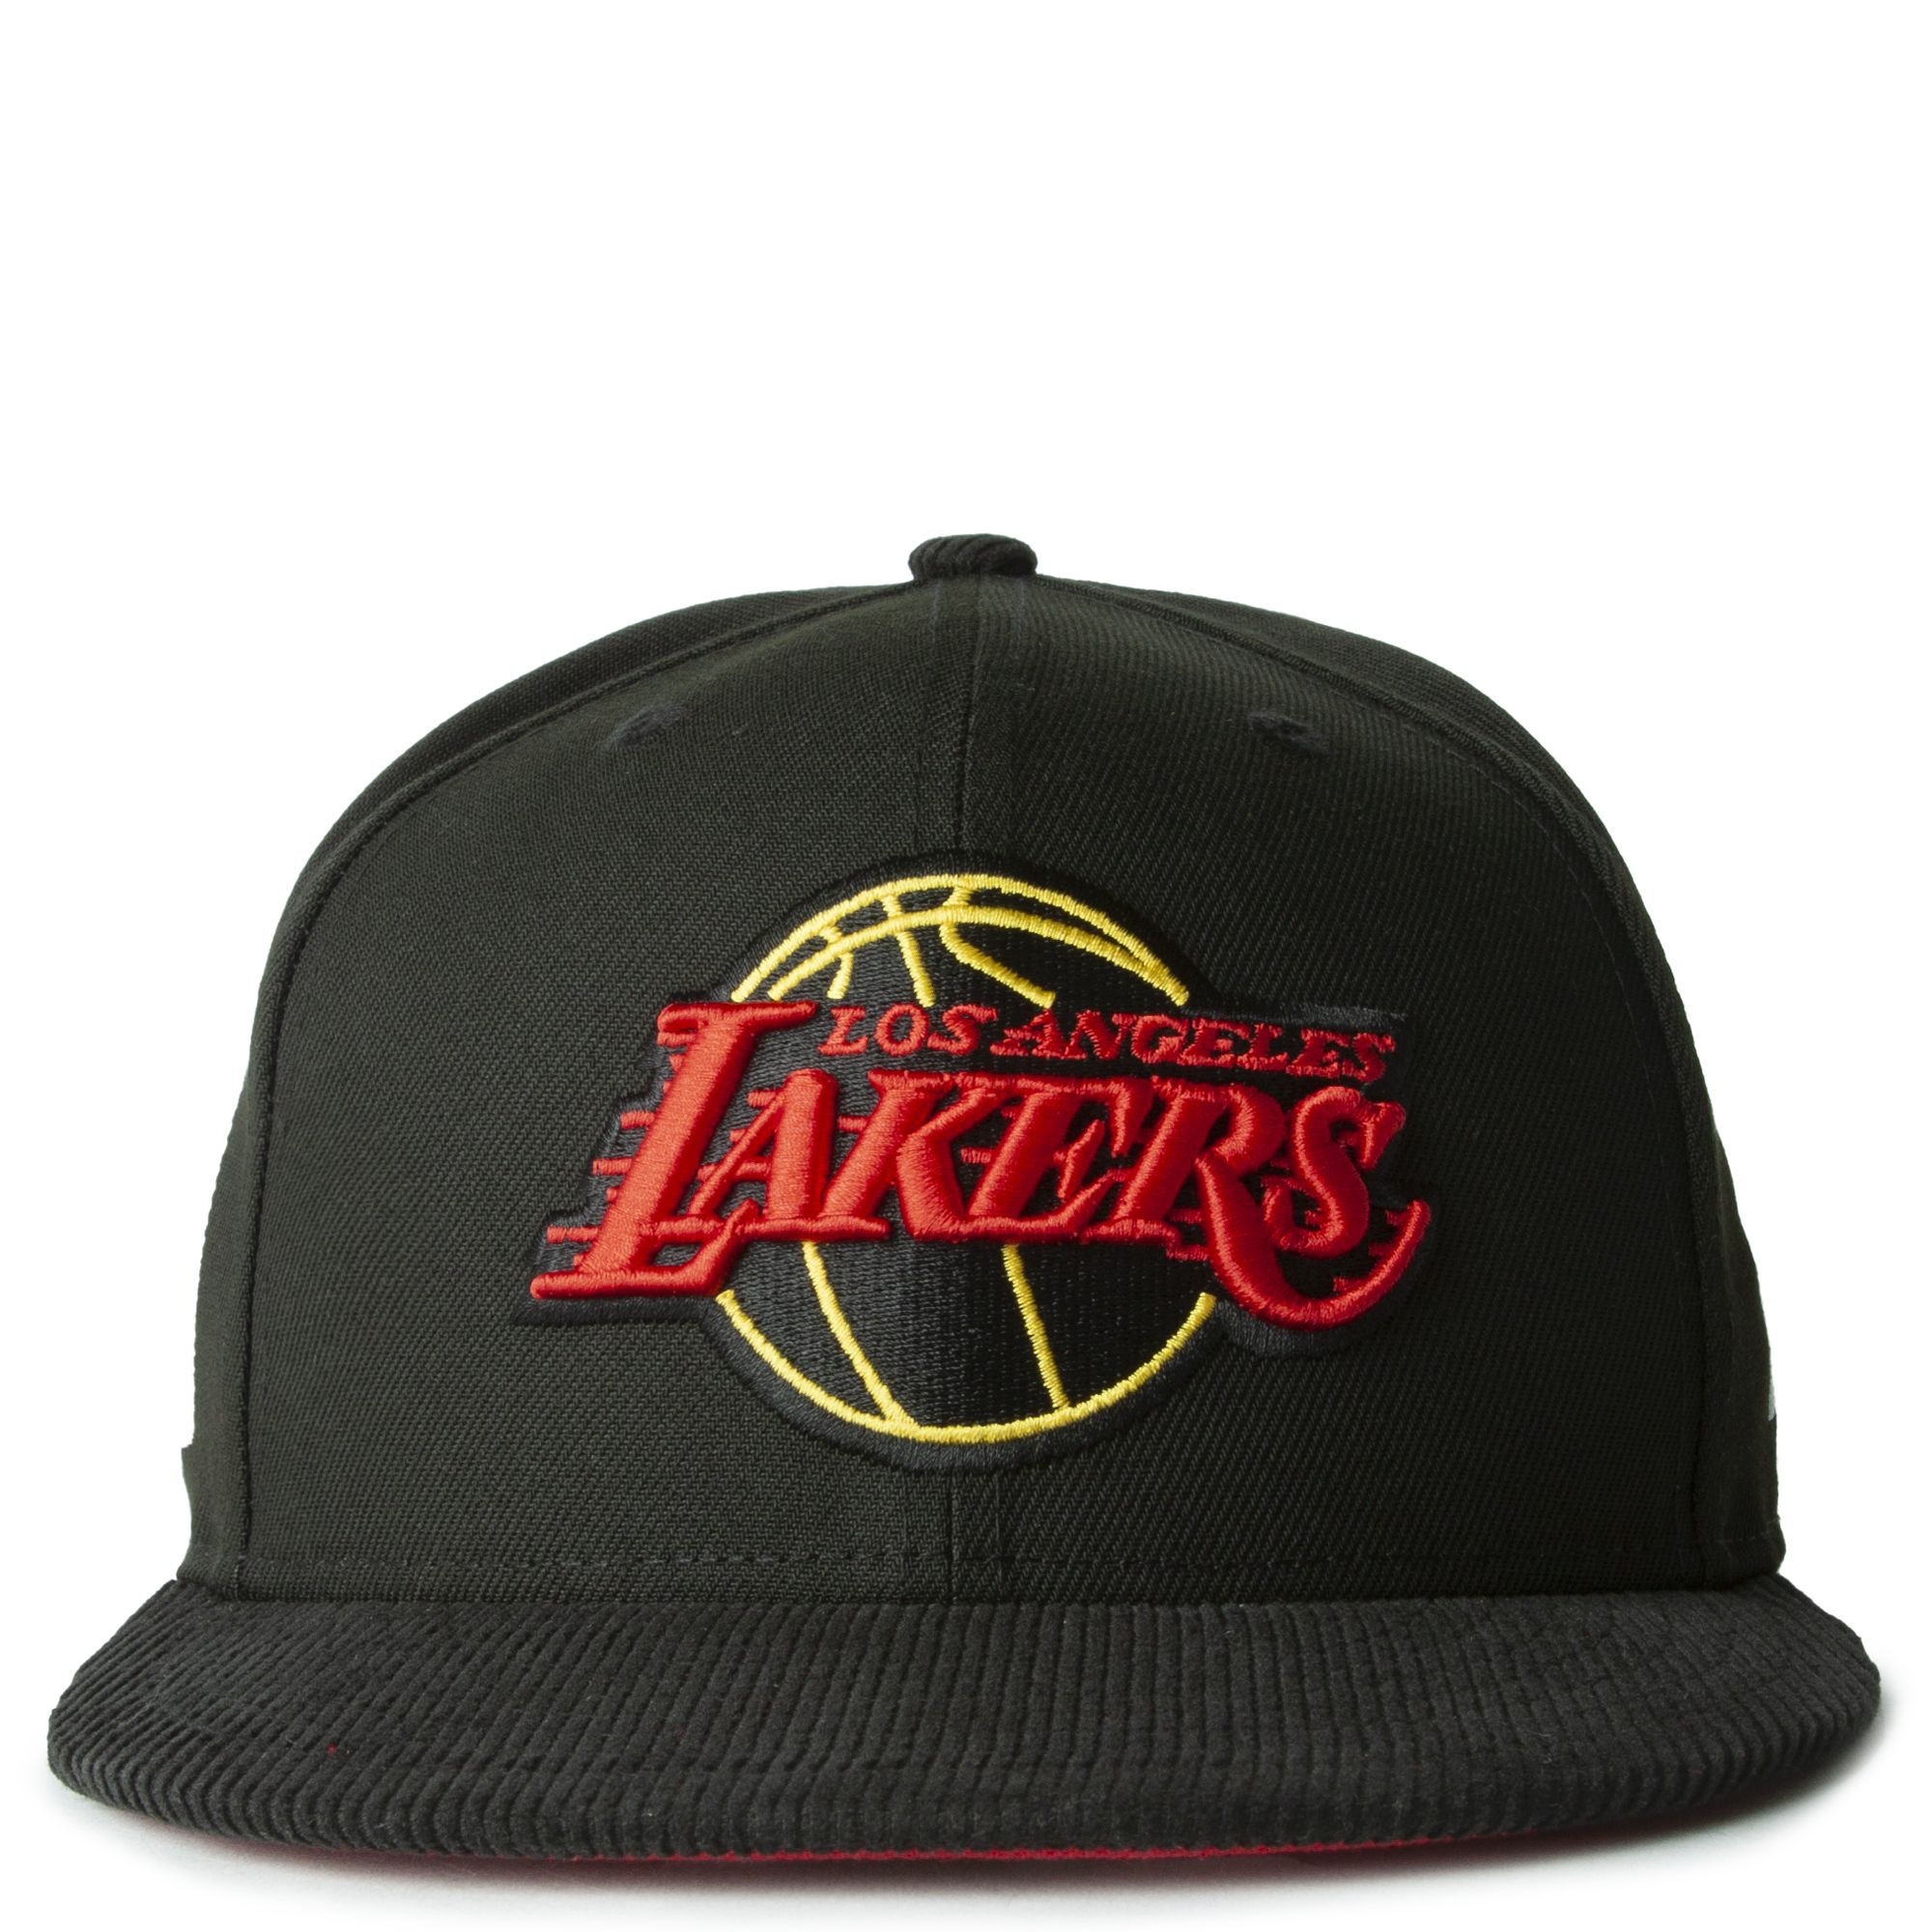 New Era Caps Men's Lakers 59FIFTY Fitted Hat Black Cord